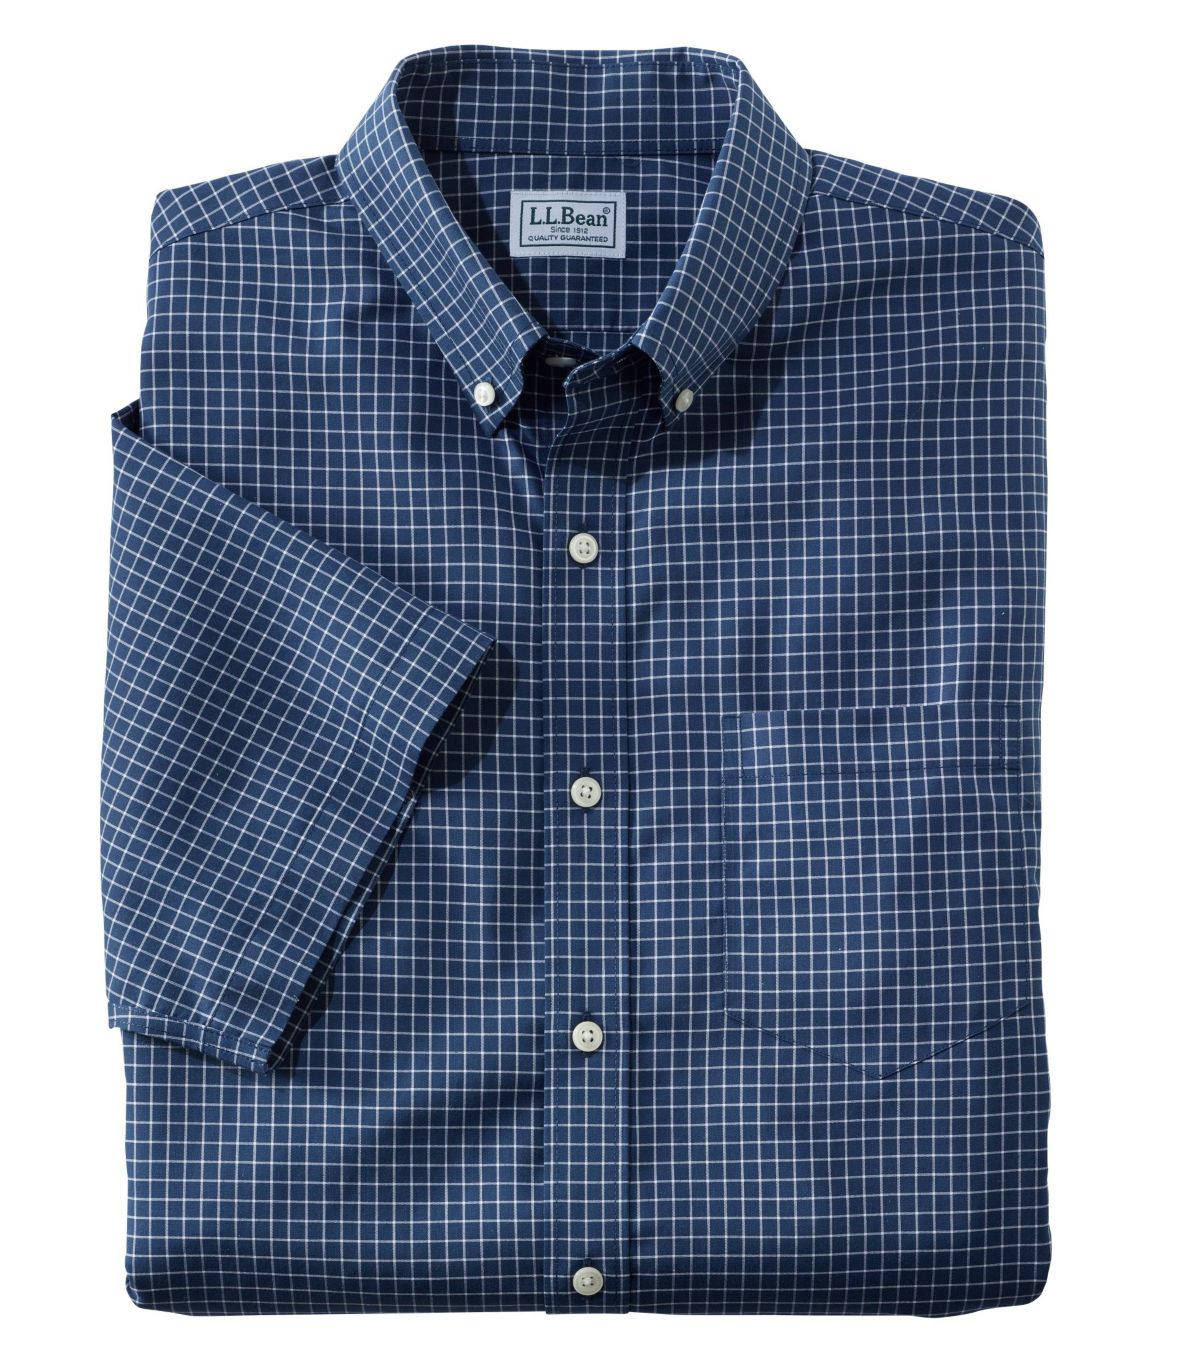 Men's Wrinkle-Free Check Shirt, Traditional Fit Short-Sleeve